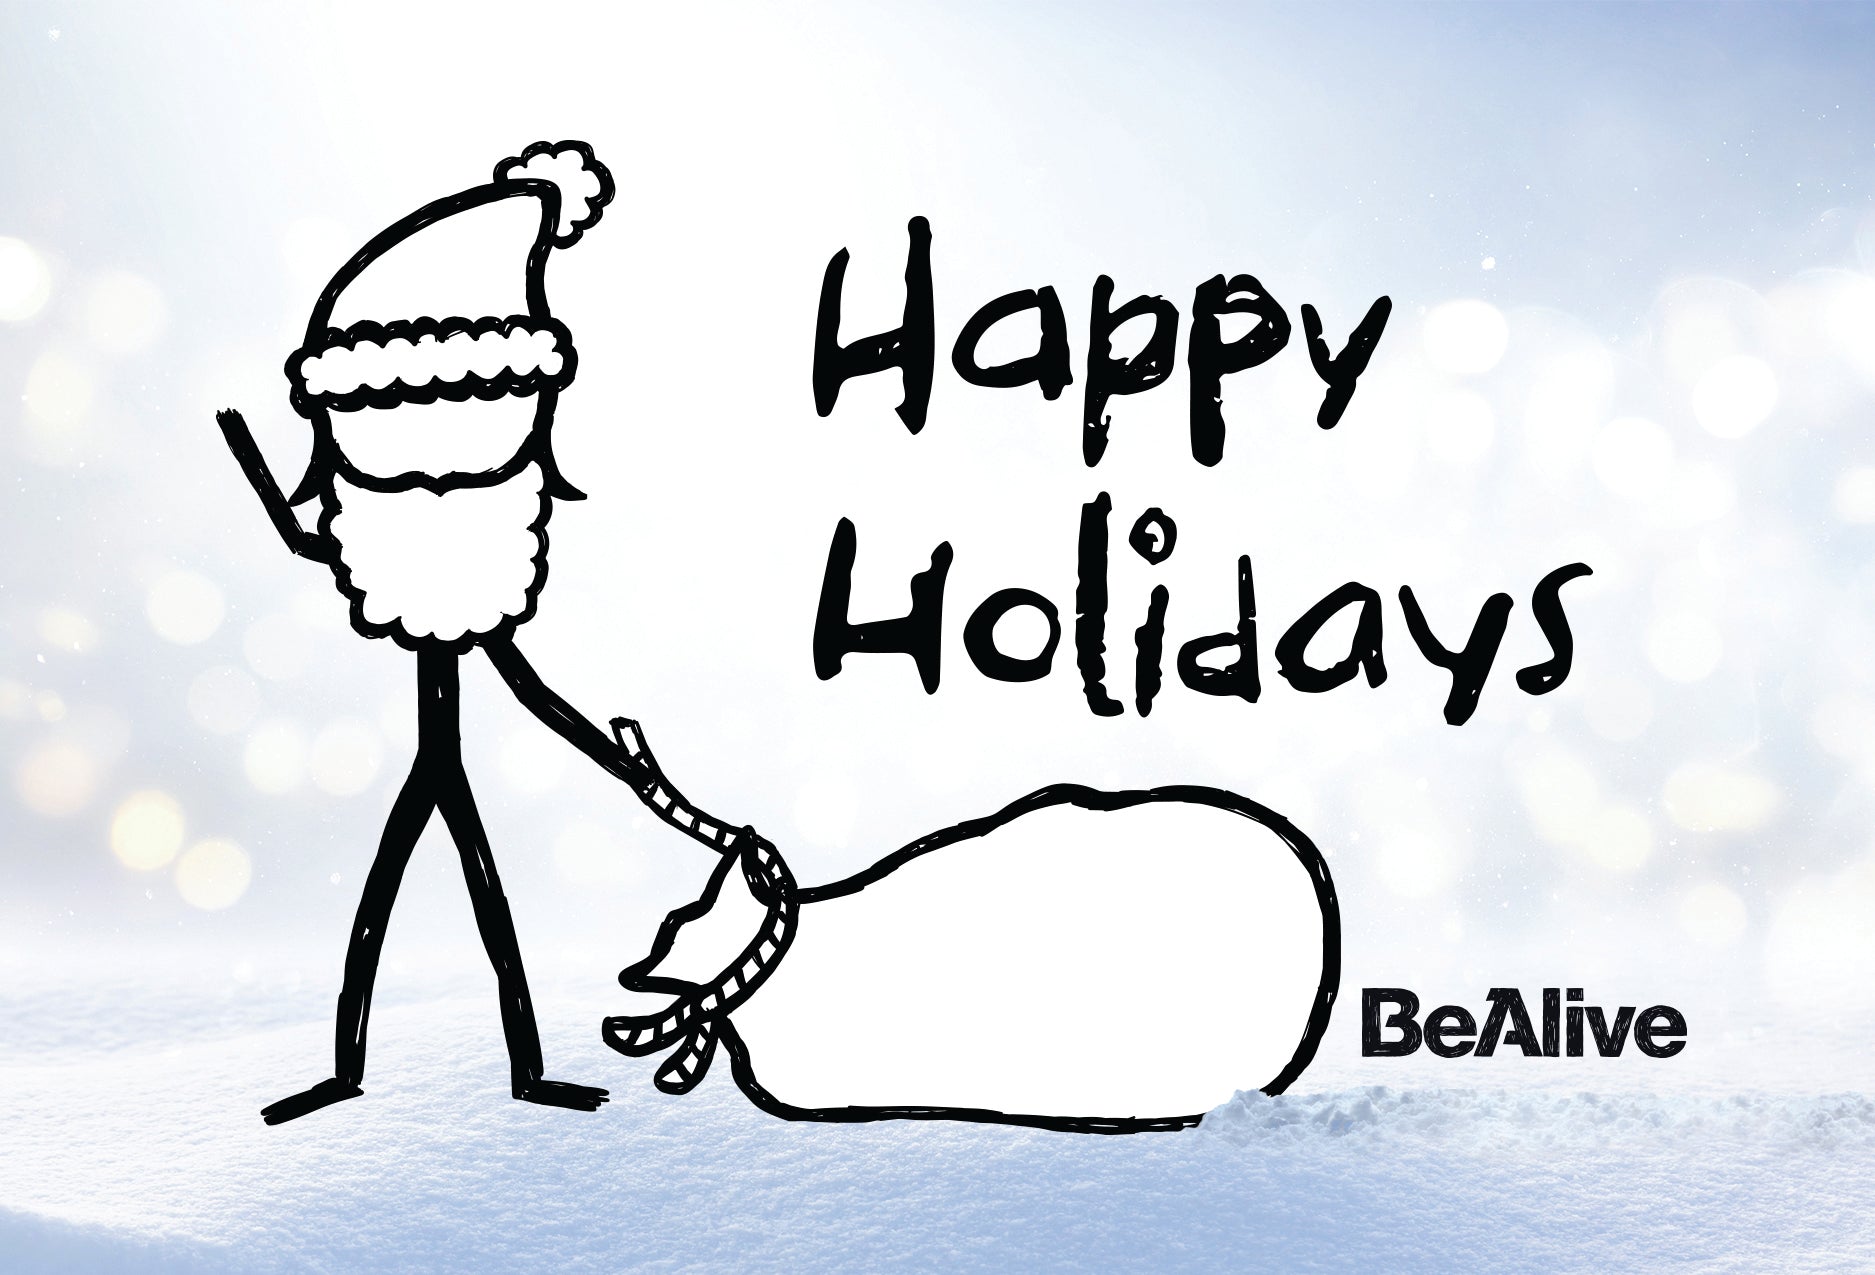 Merry Christmas and a Happy Holiday season from the BeAlive crew!